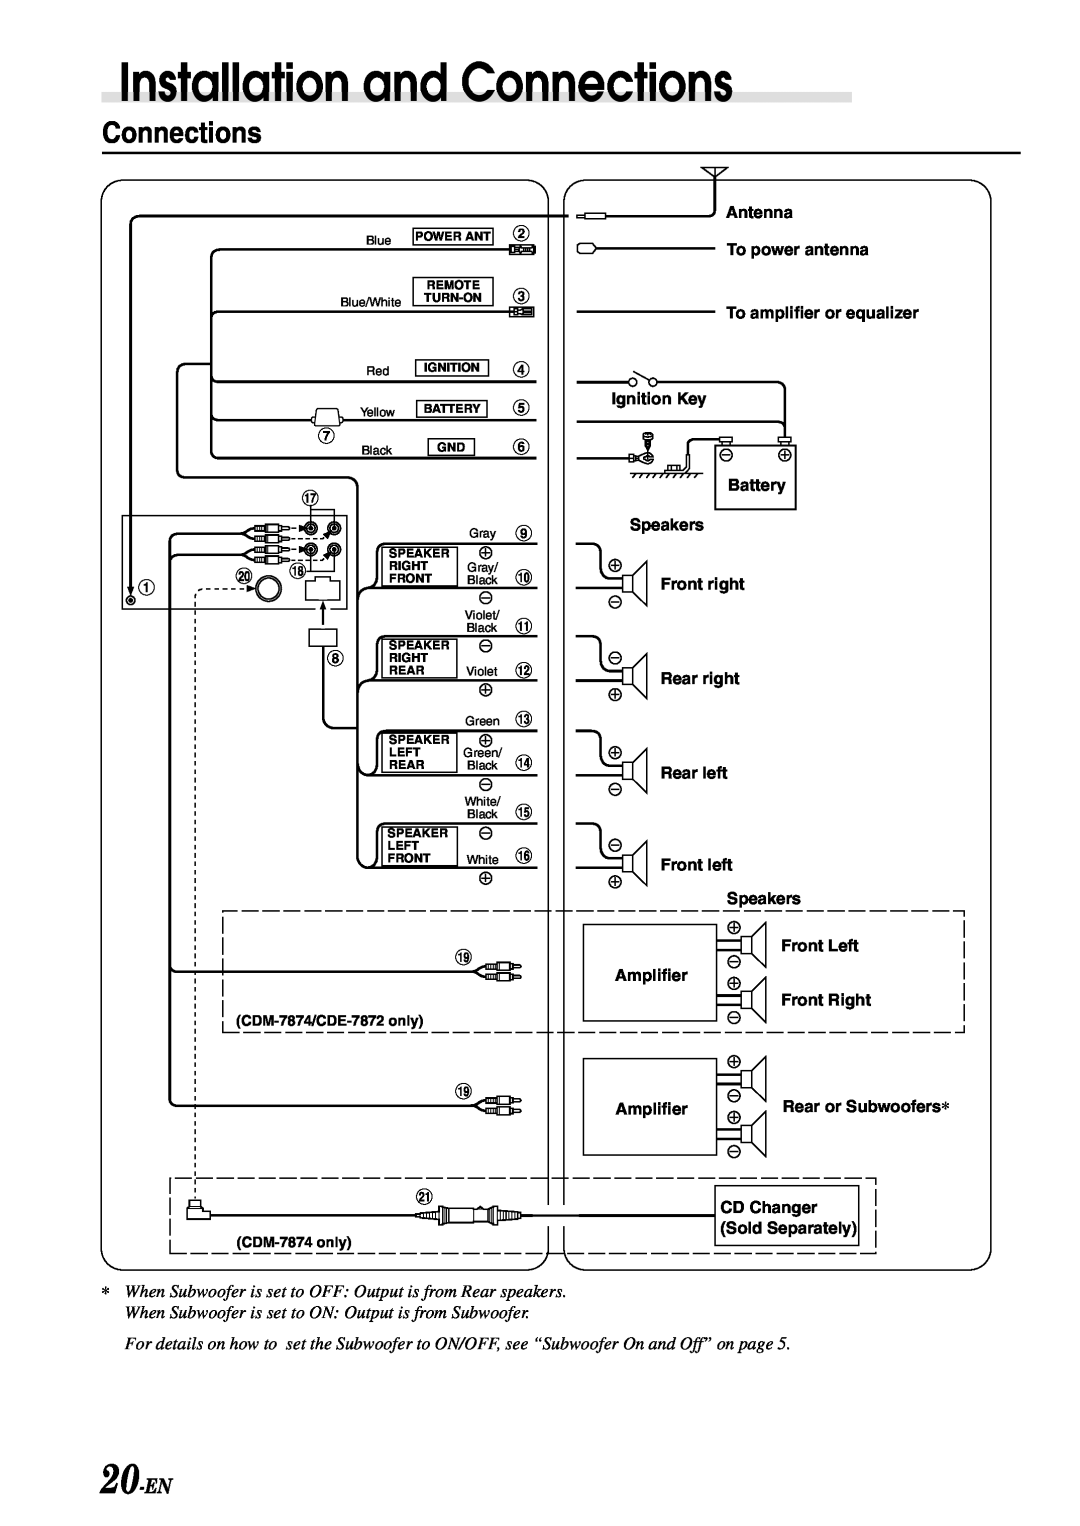 Alpine CDM-7874, CDE-7870, CDE-7872 owner manual Installation and Connections, 20-EN 